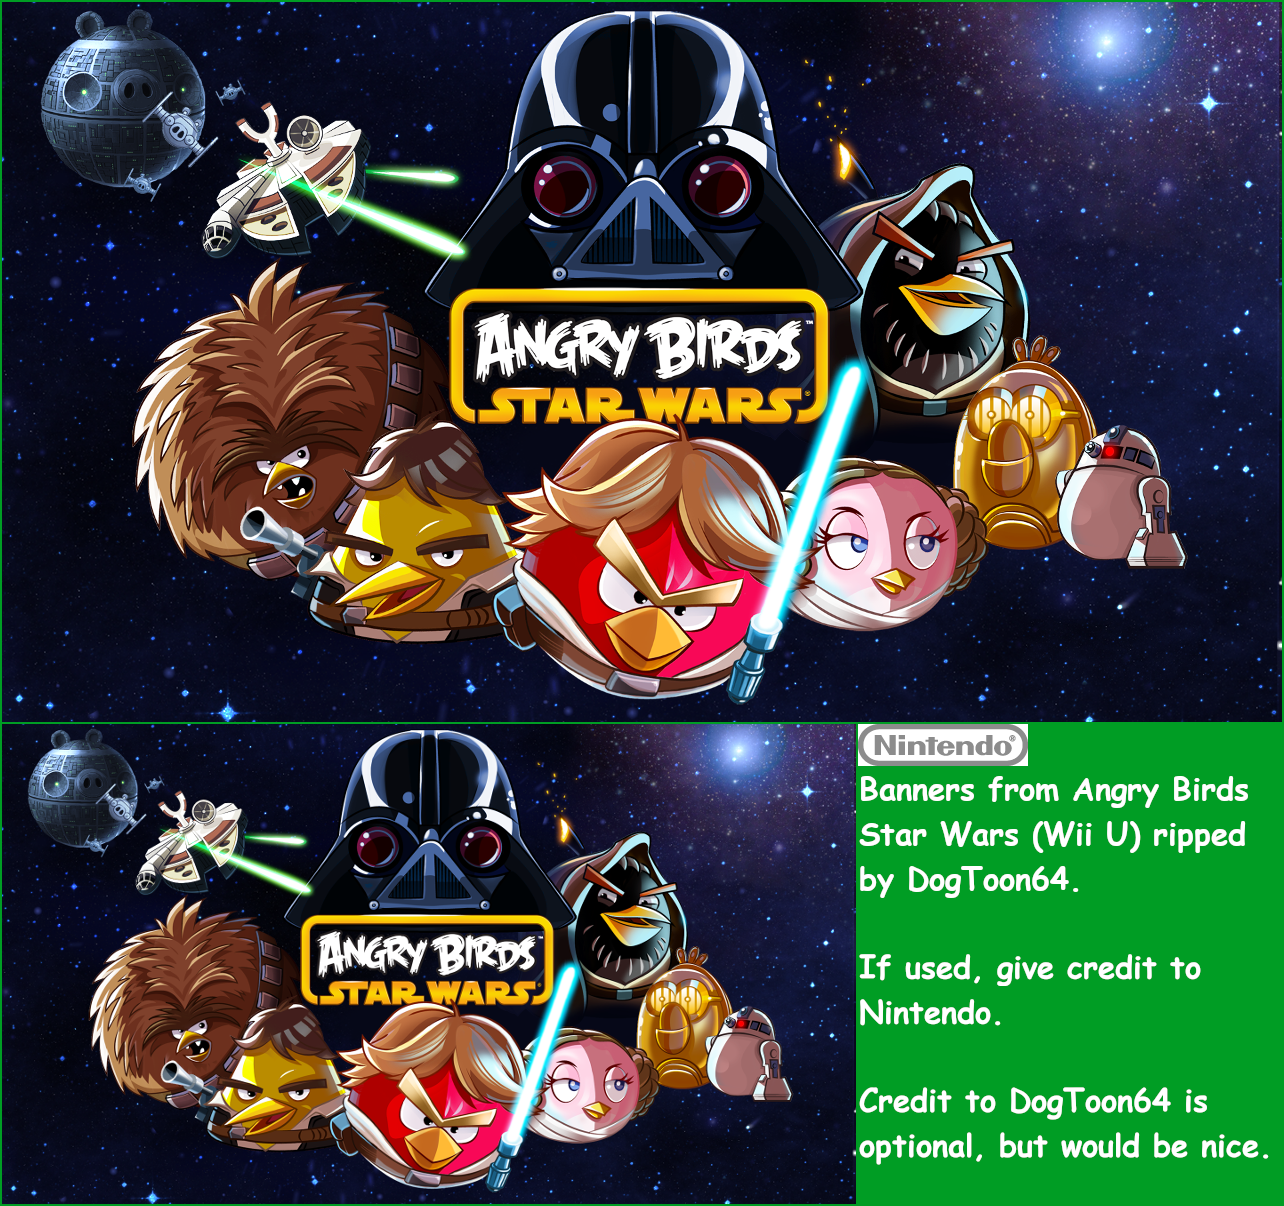 Angry Birds Star Wars - Banners